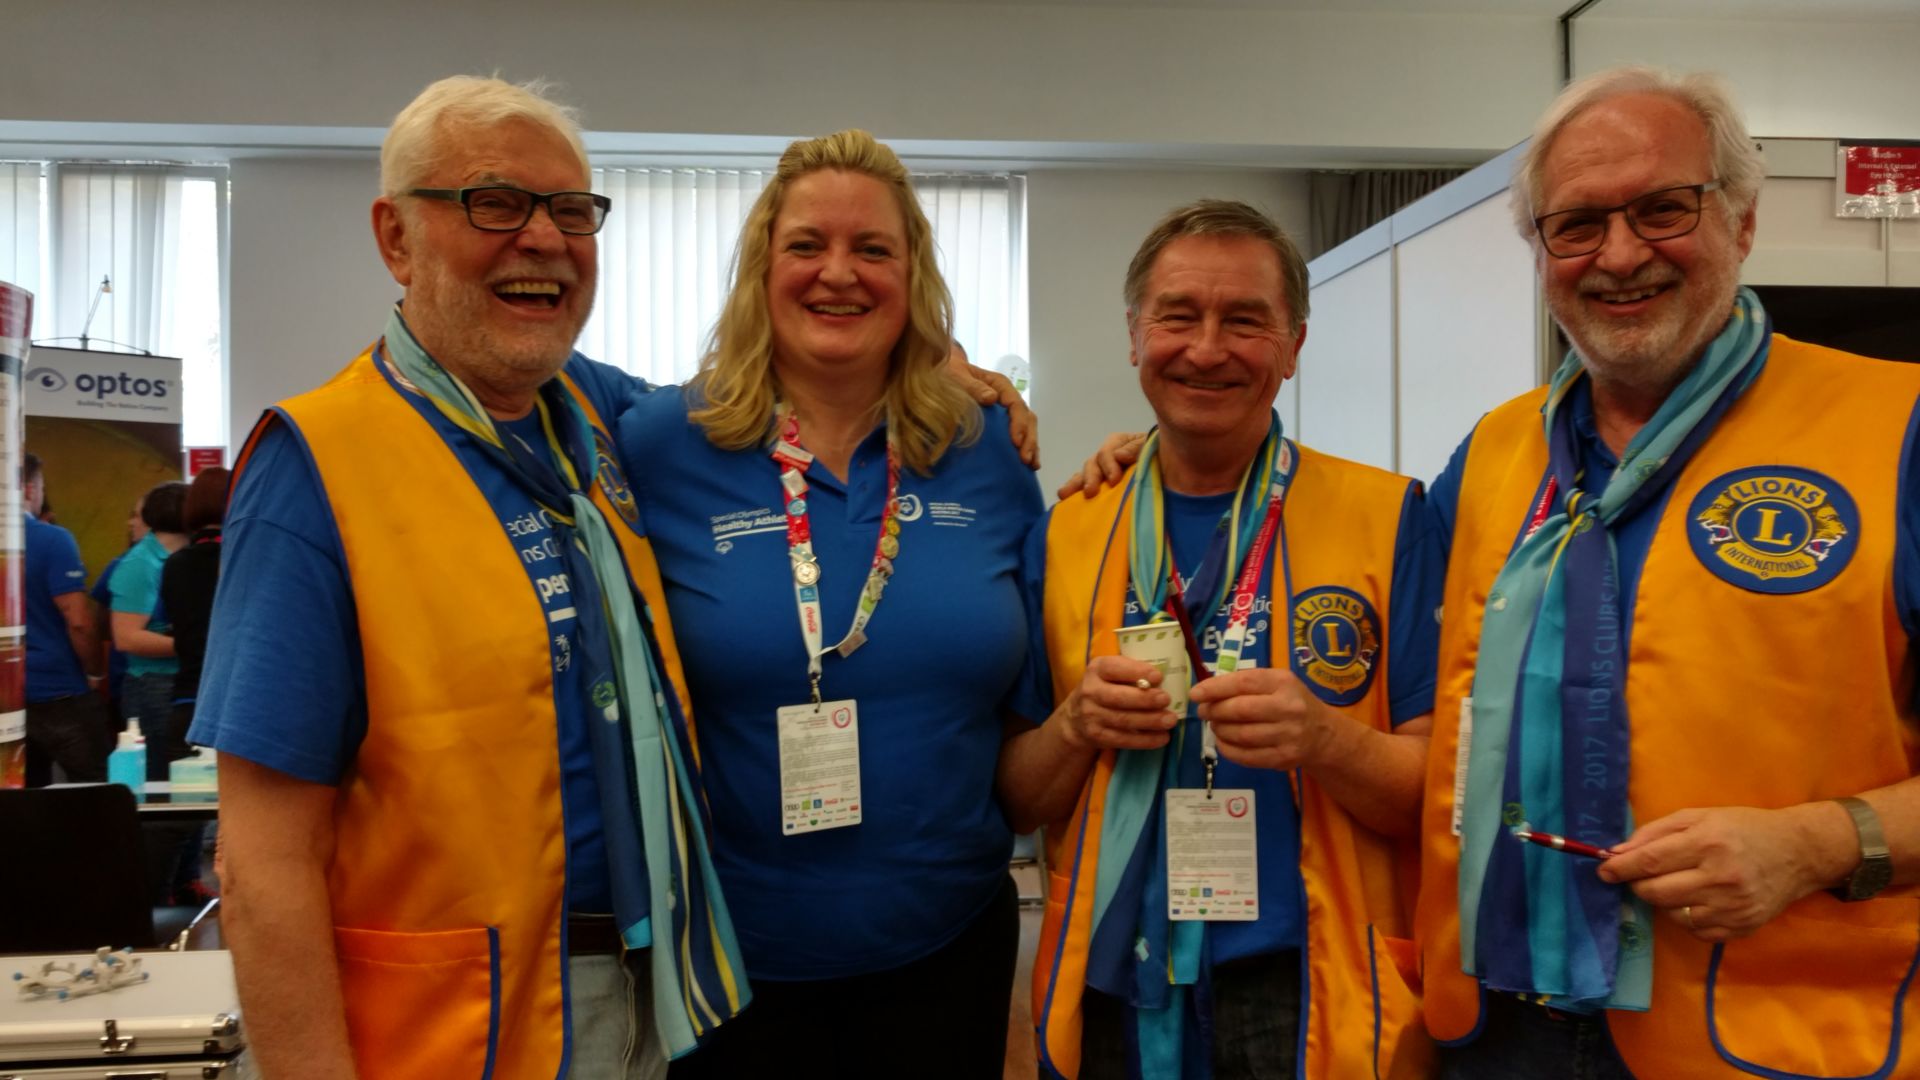 Dr. Knueppel with Lions Club International volunteers from Graz, Austria at the 2017 World WInter Games